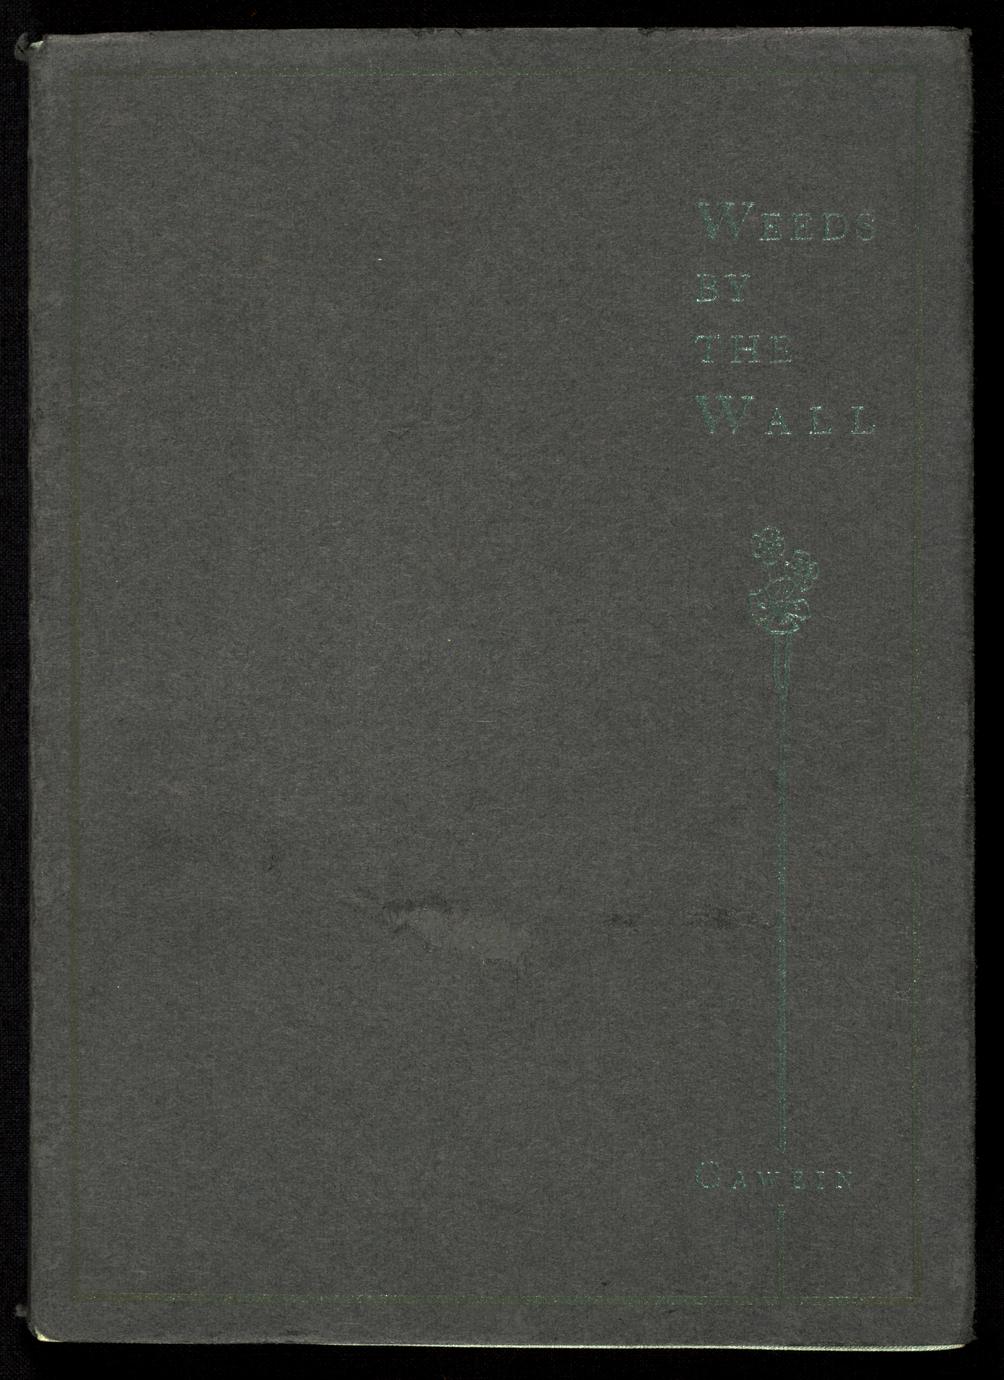 Weeds by the wall : verses (1 of 4)